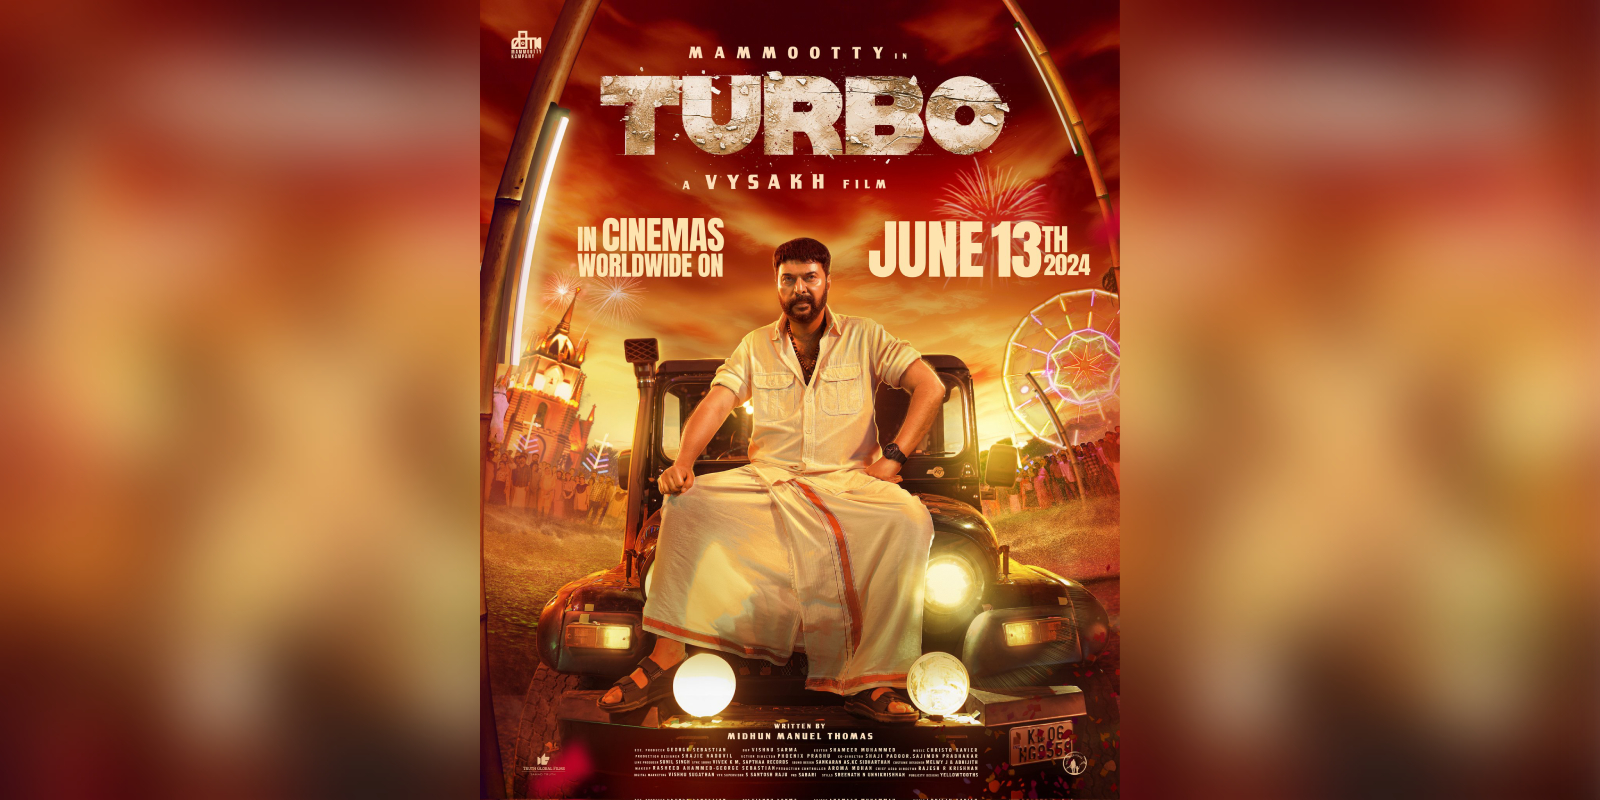 Turbo release announced